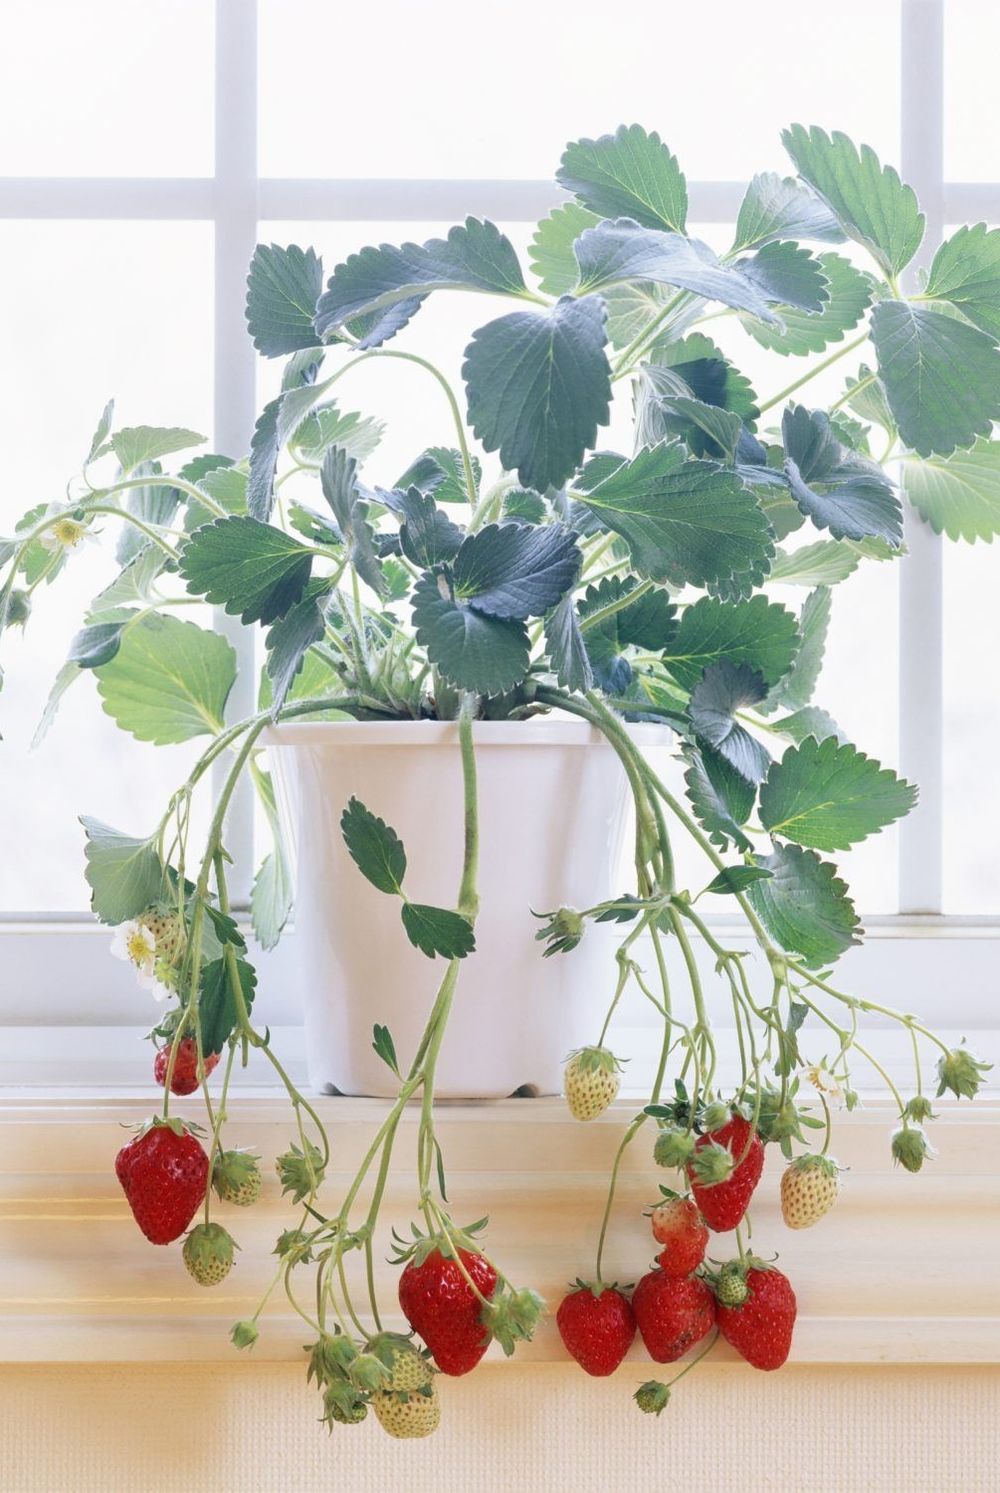 The Ultimate Guide to Growing Herbs
Indoors